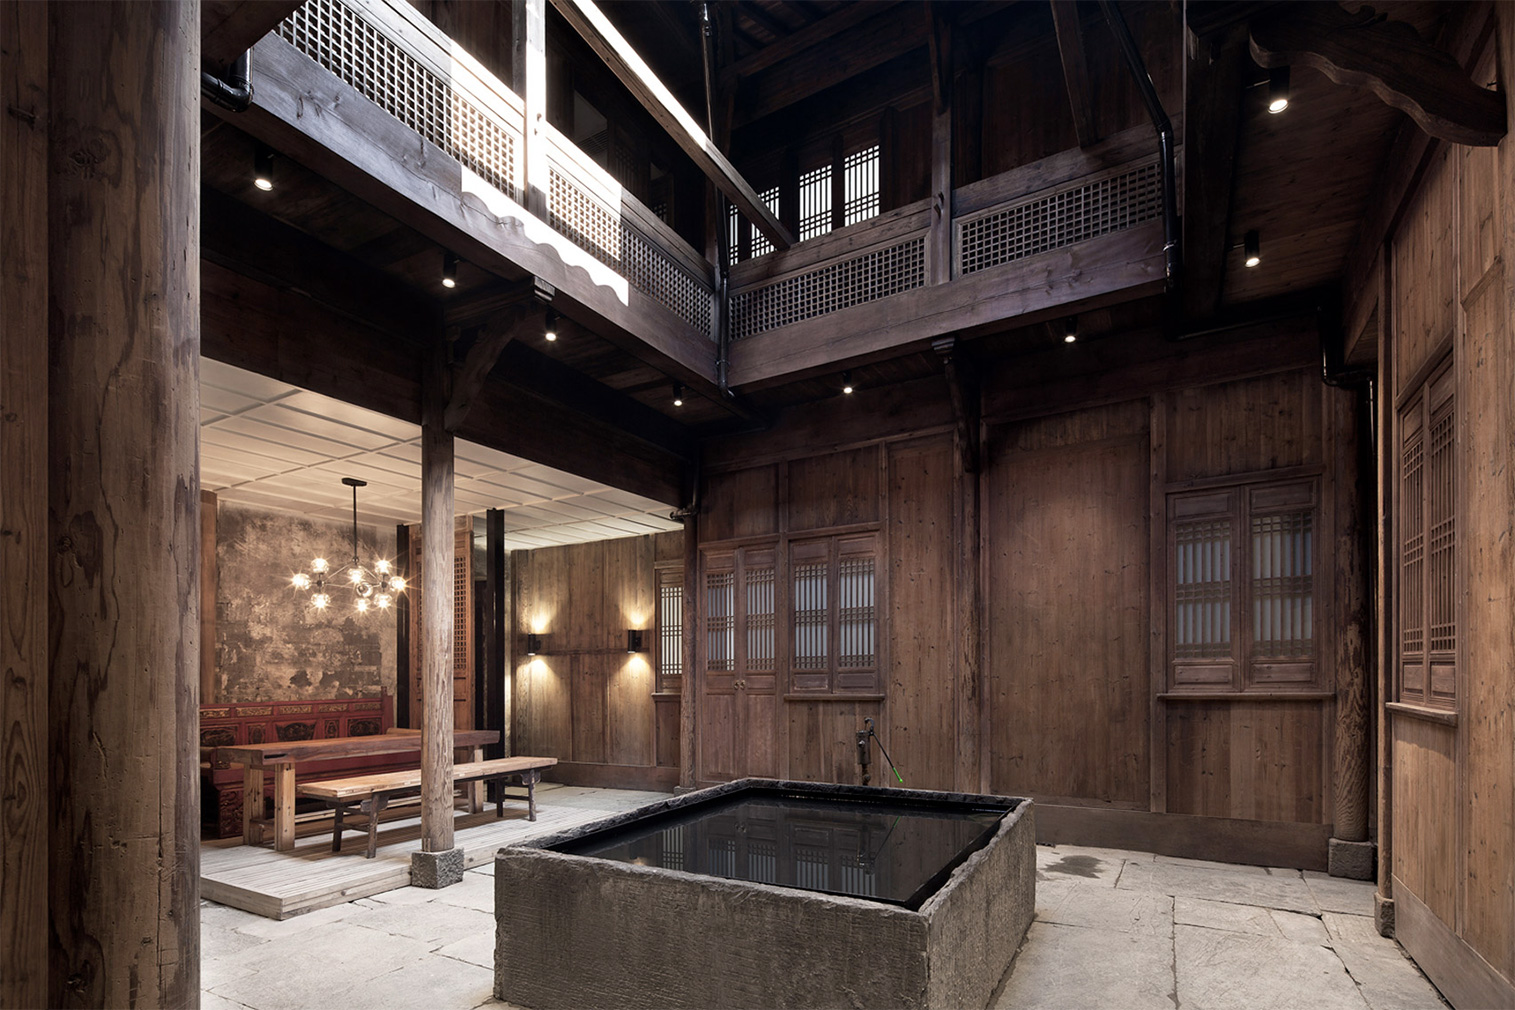 A 300-year-old ruin is restored as a hotel in rural China